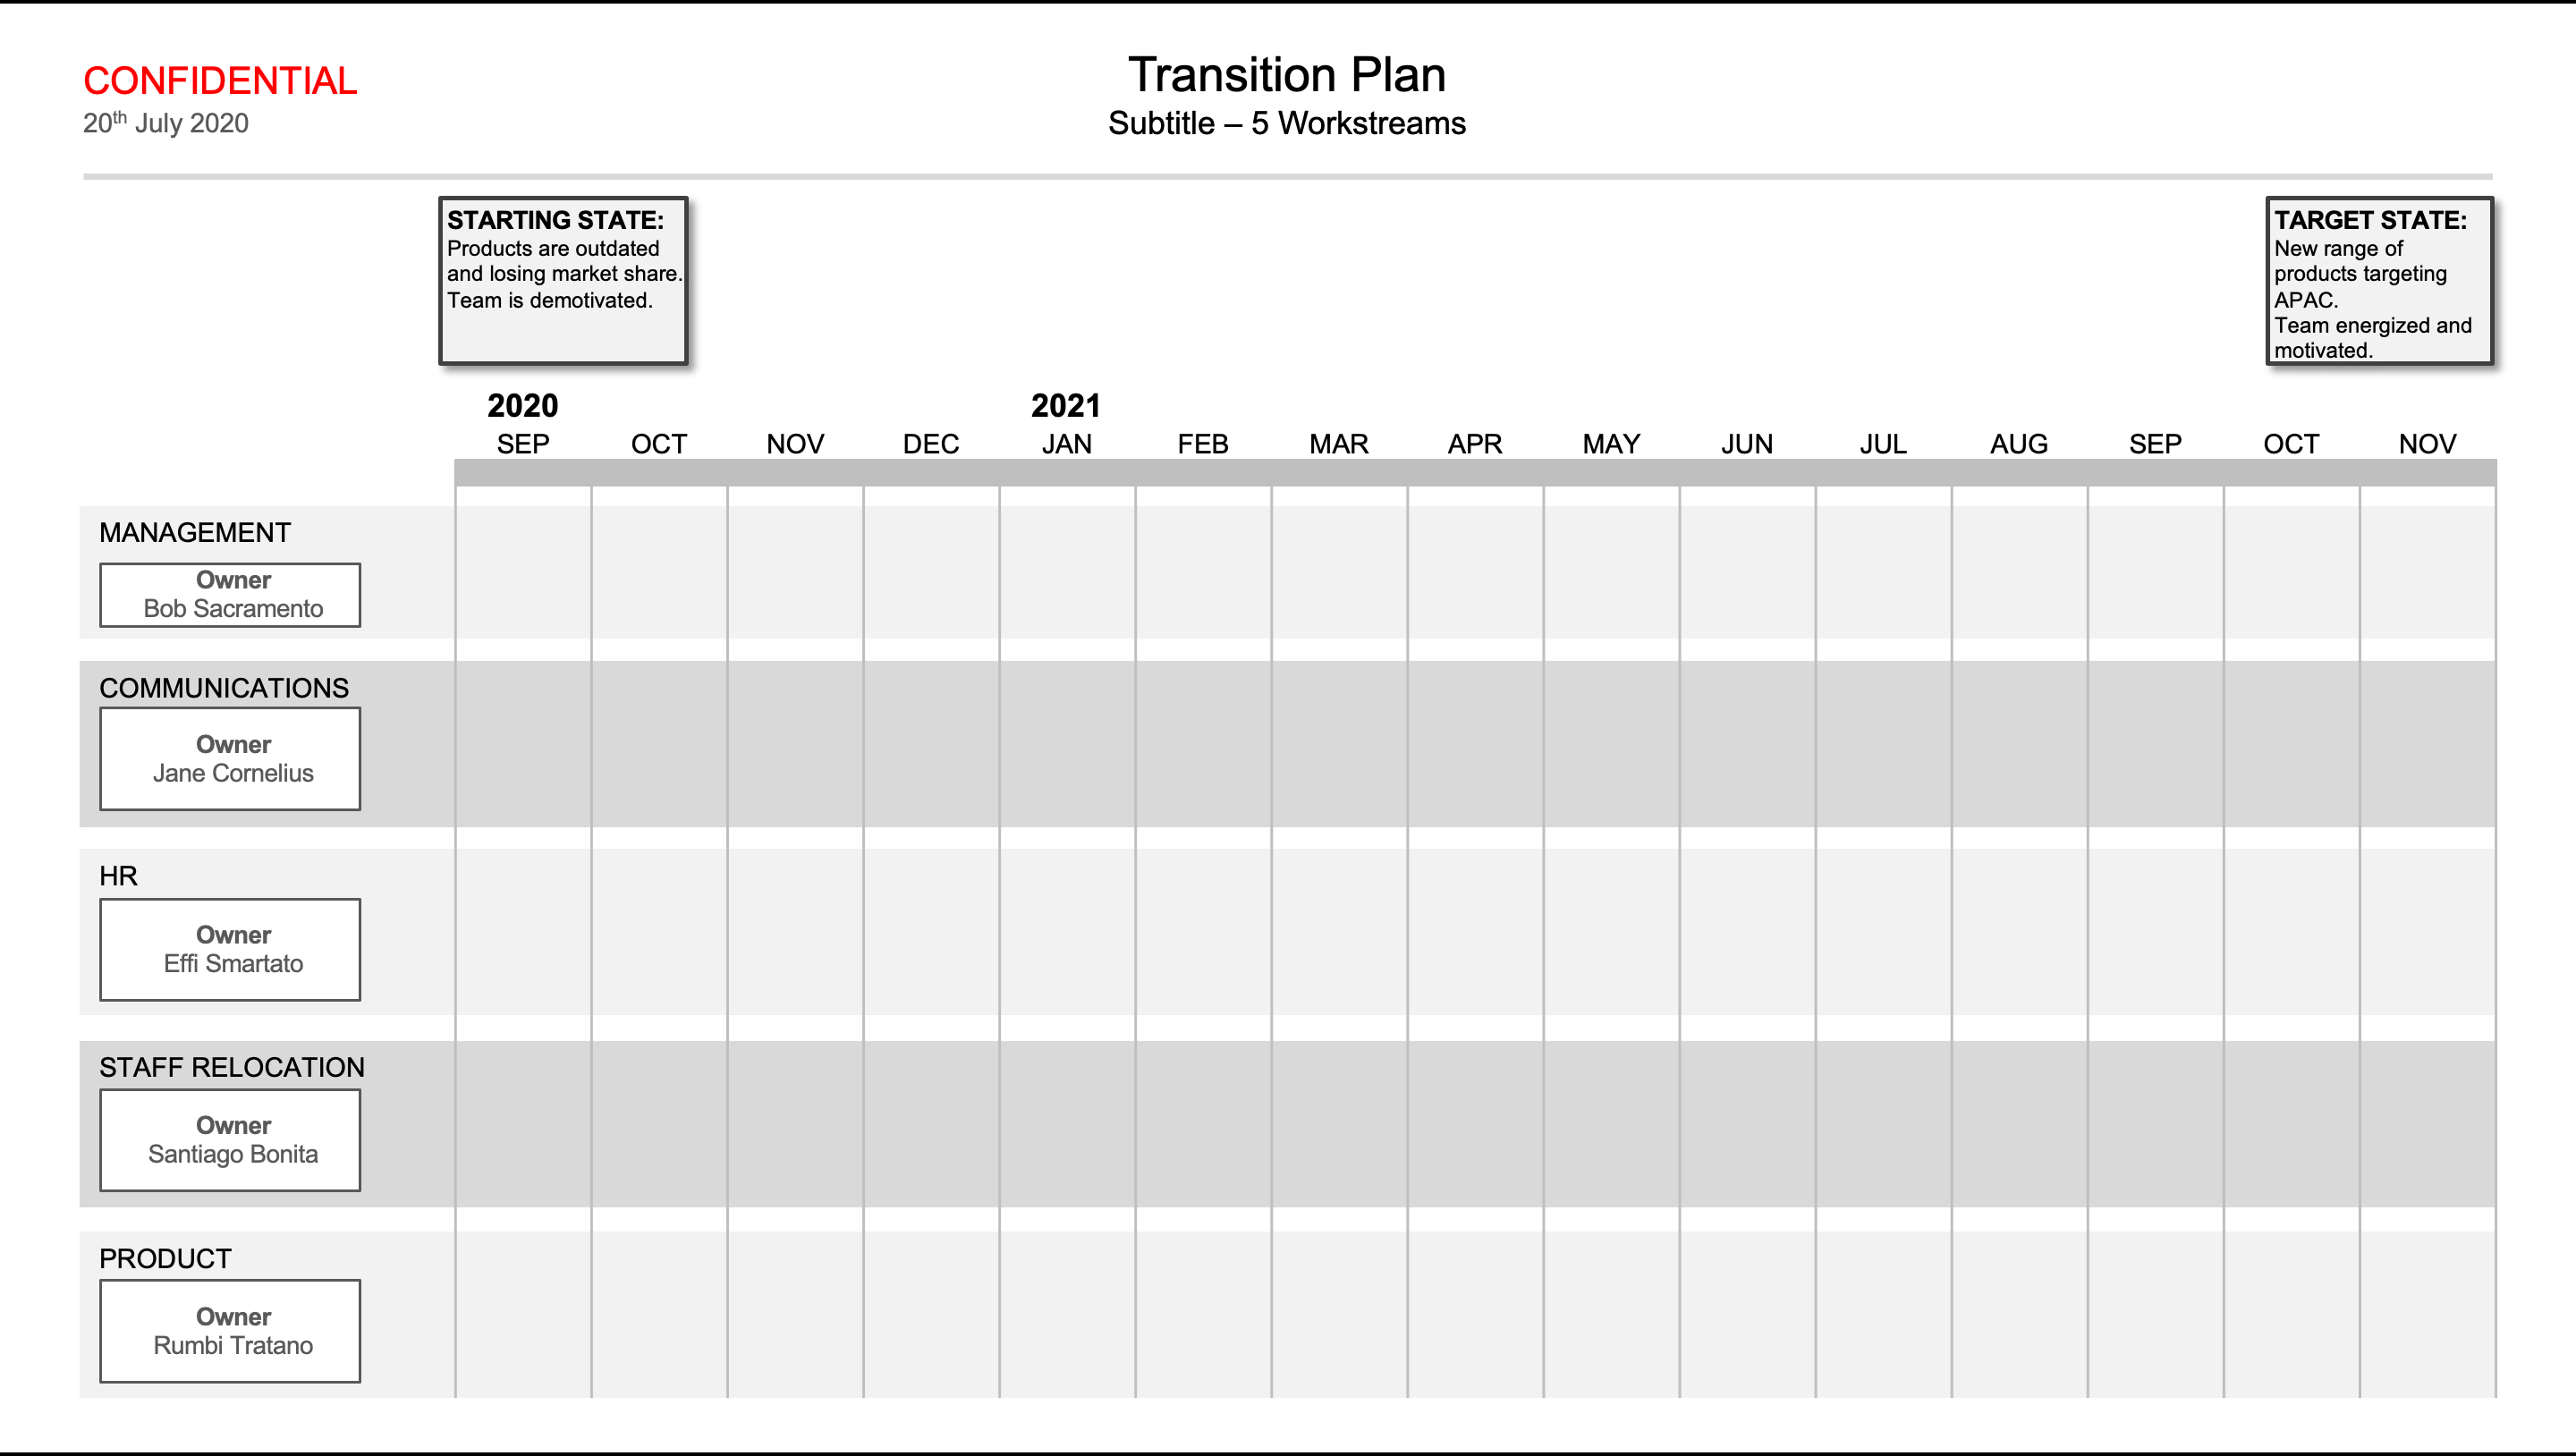 Transition Plan creation, showing the workstream areas for Transition